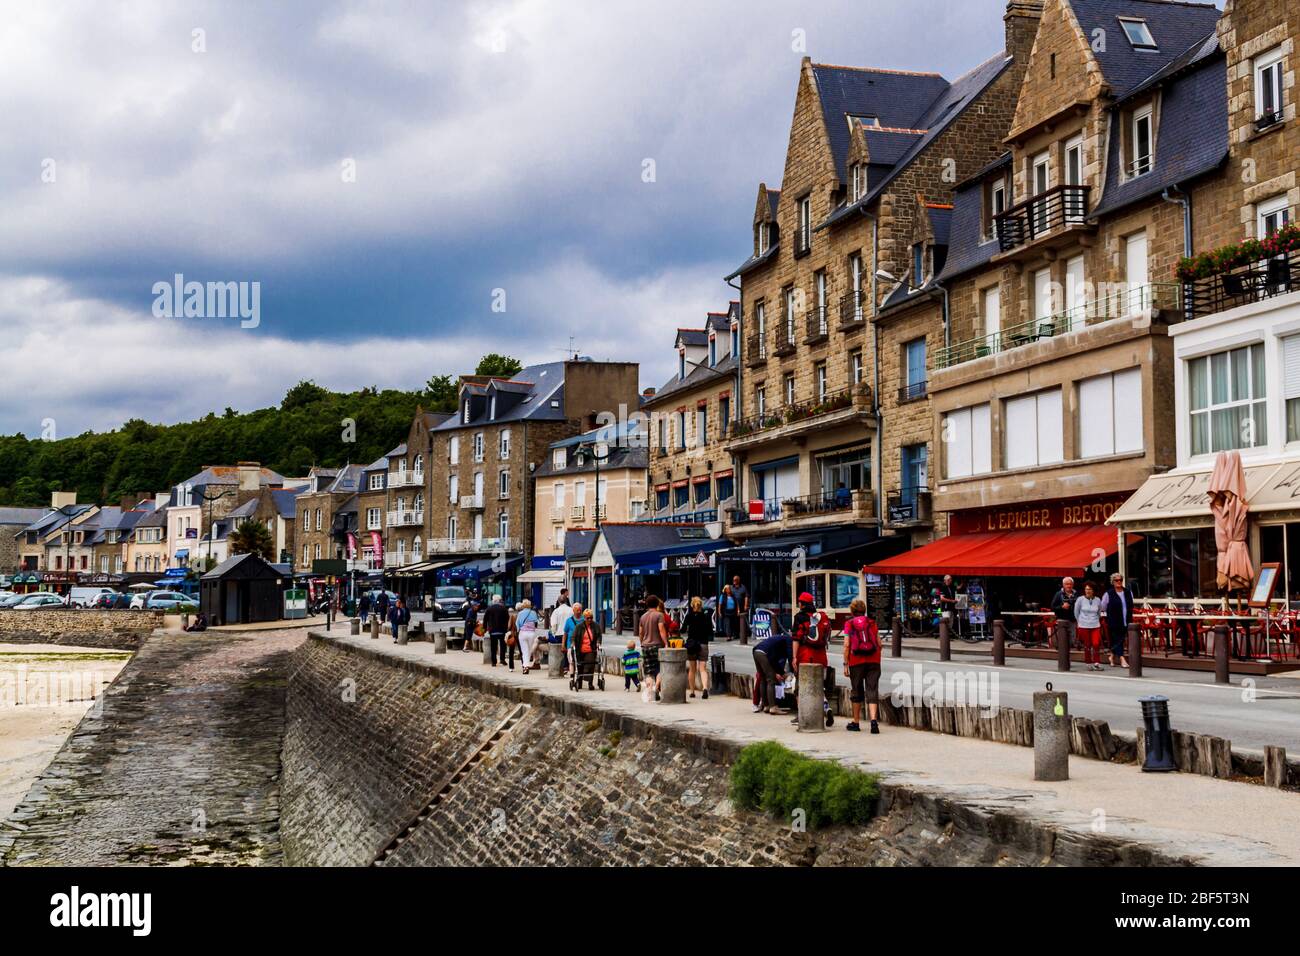 Cancale, Brittany, France - 31 May 2018: Embankment of a seaside town at low tide. Stock Photo